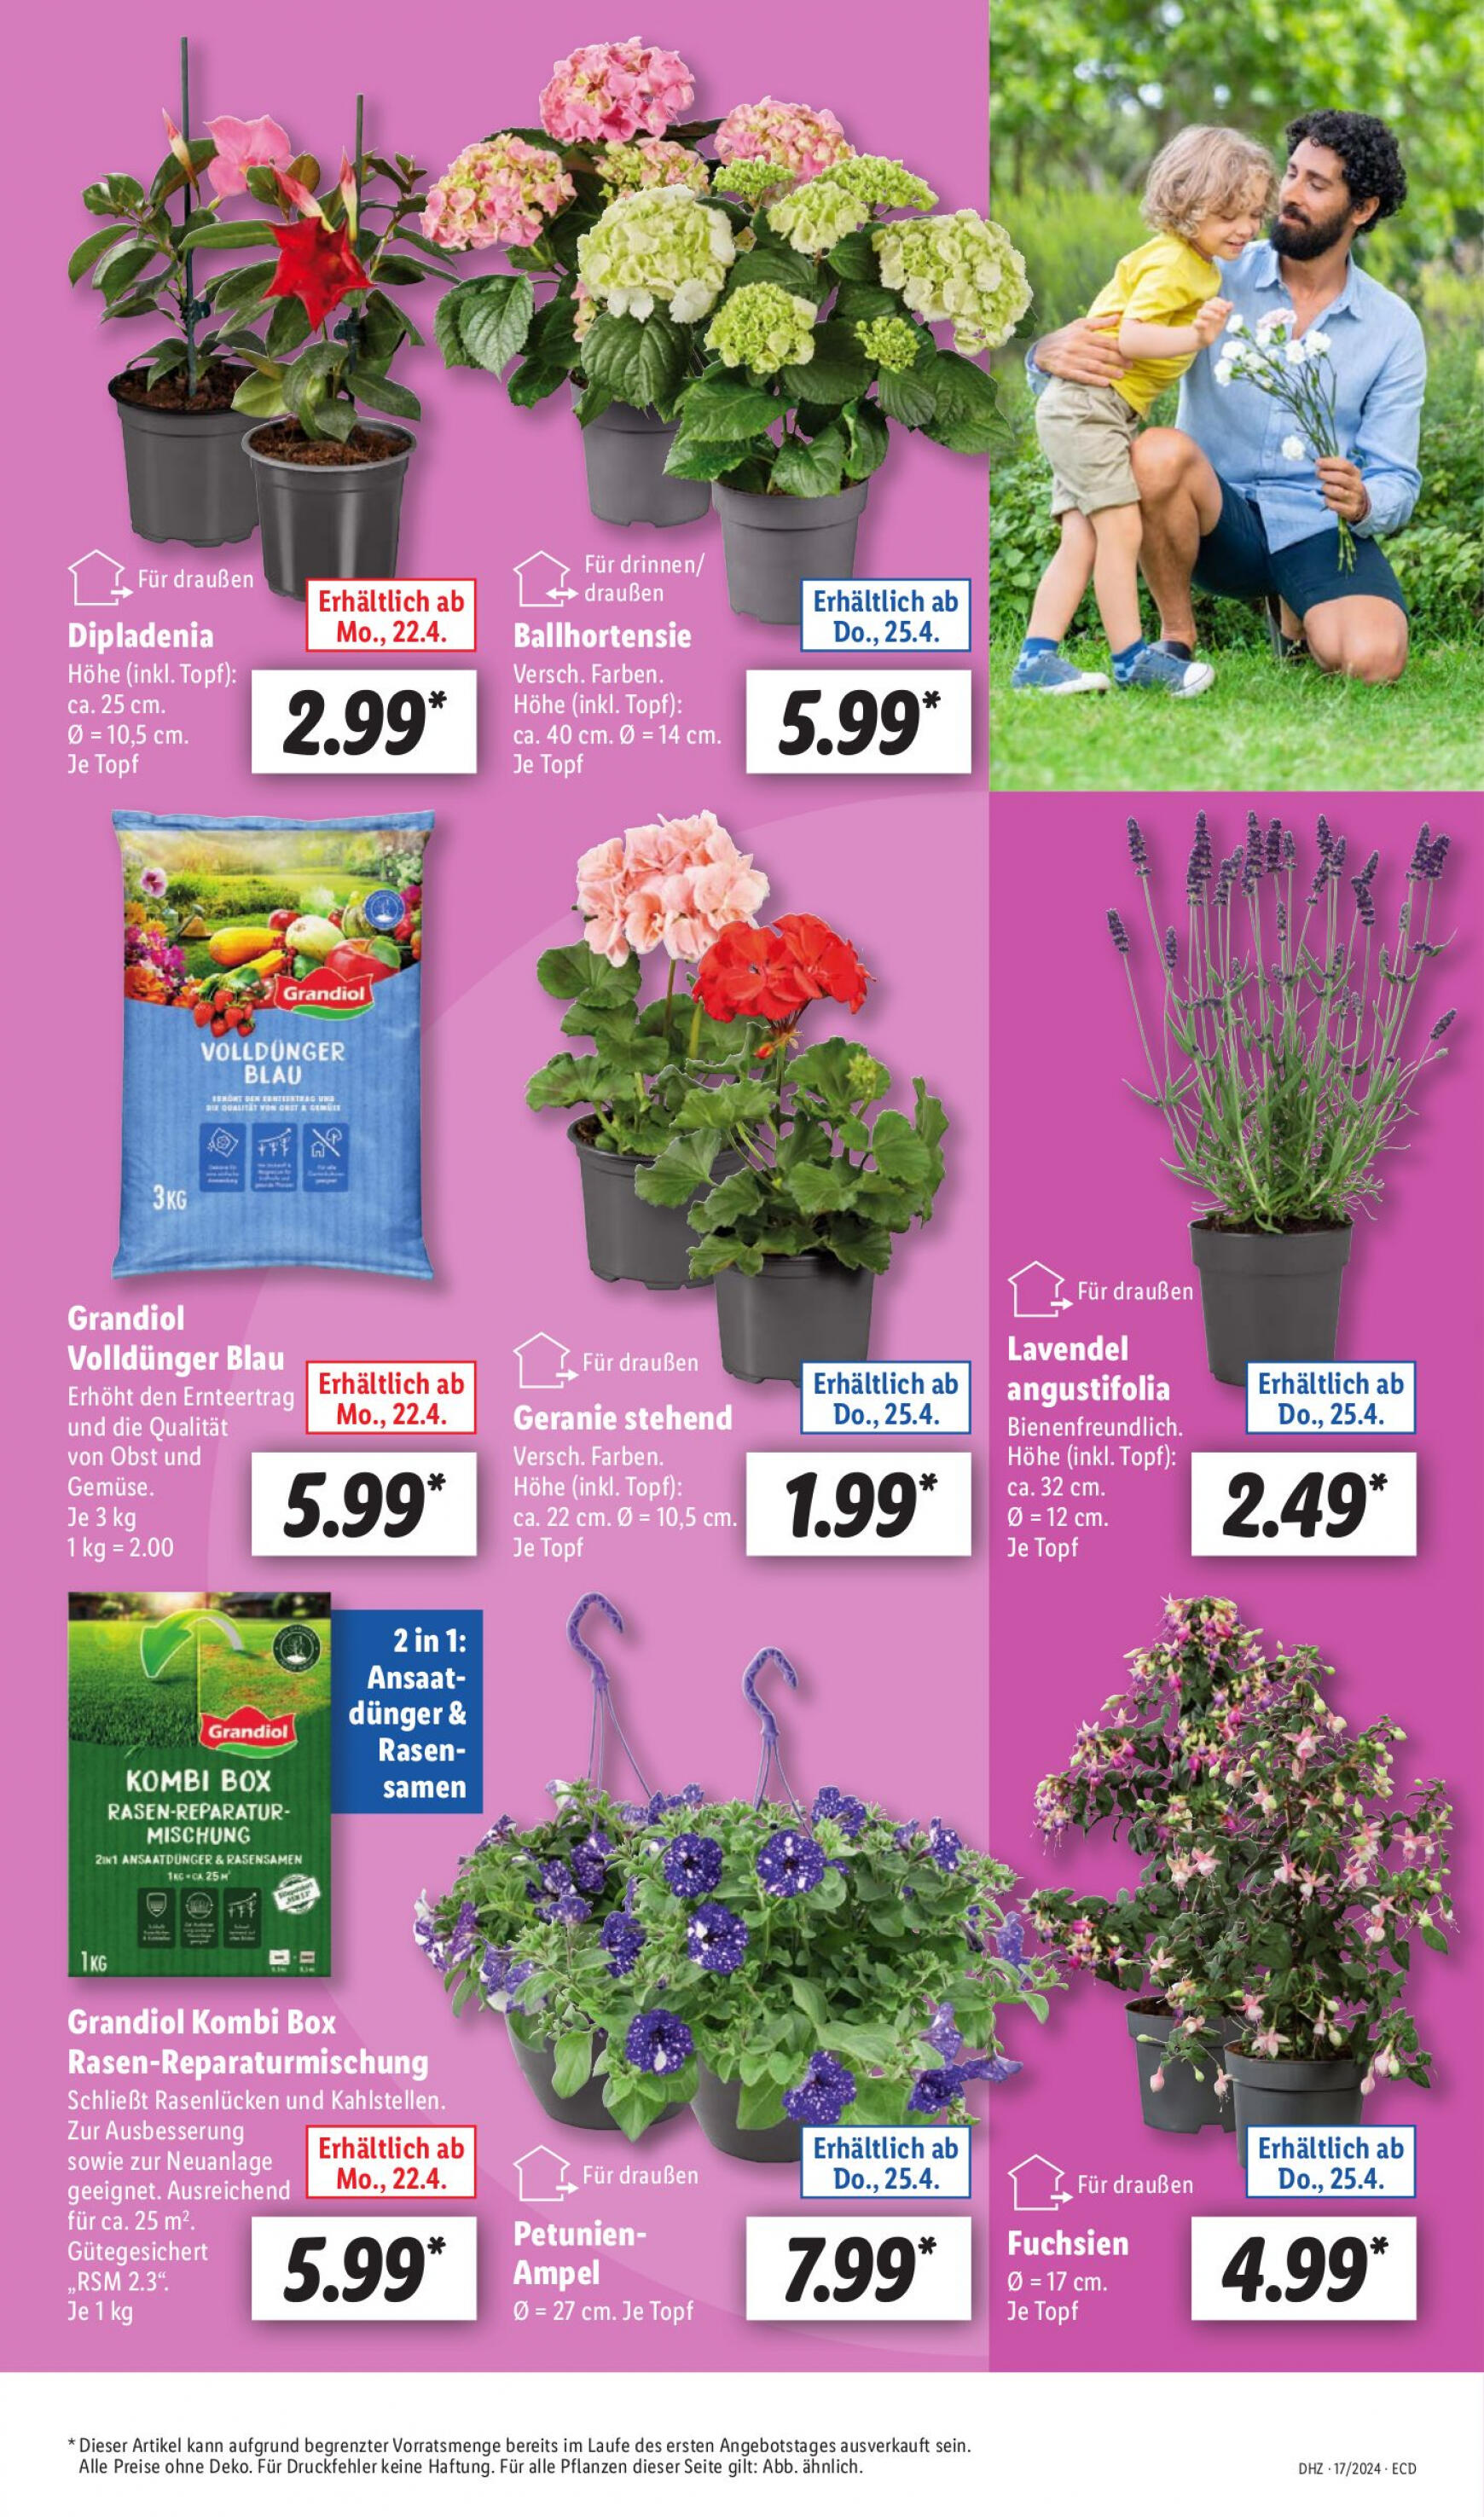 lidl - Flyer Lidl aktuell 22.04. - 27.04. - page: 5